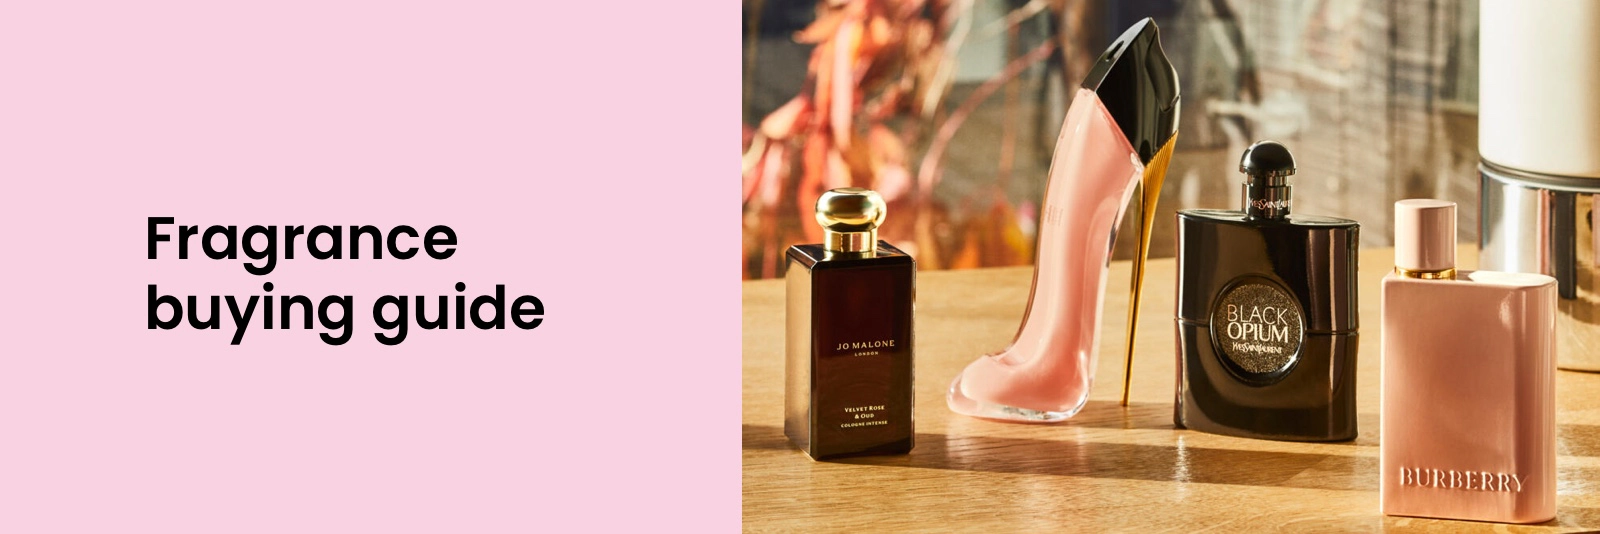 Perfume Types & Scents, How to Choose Perfume, MYER